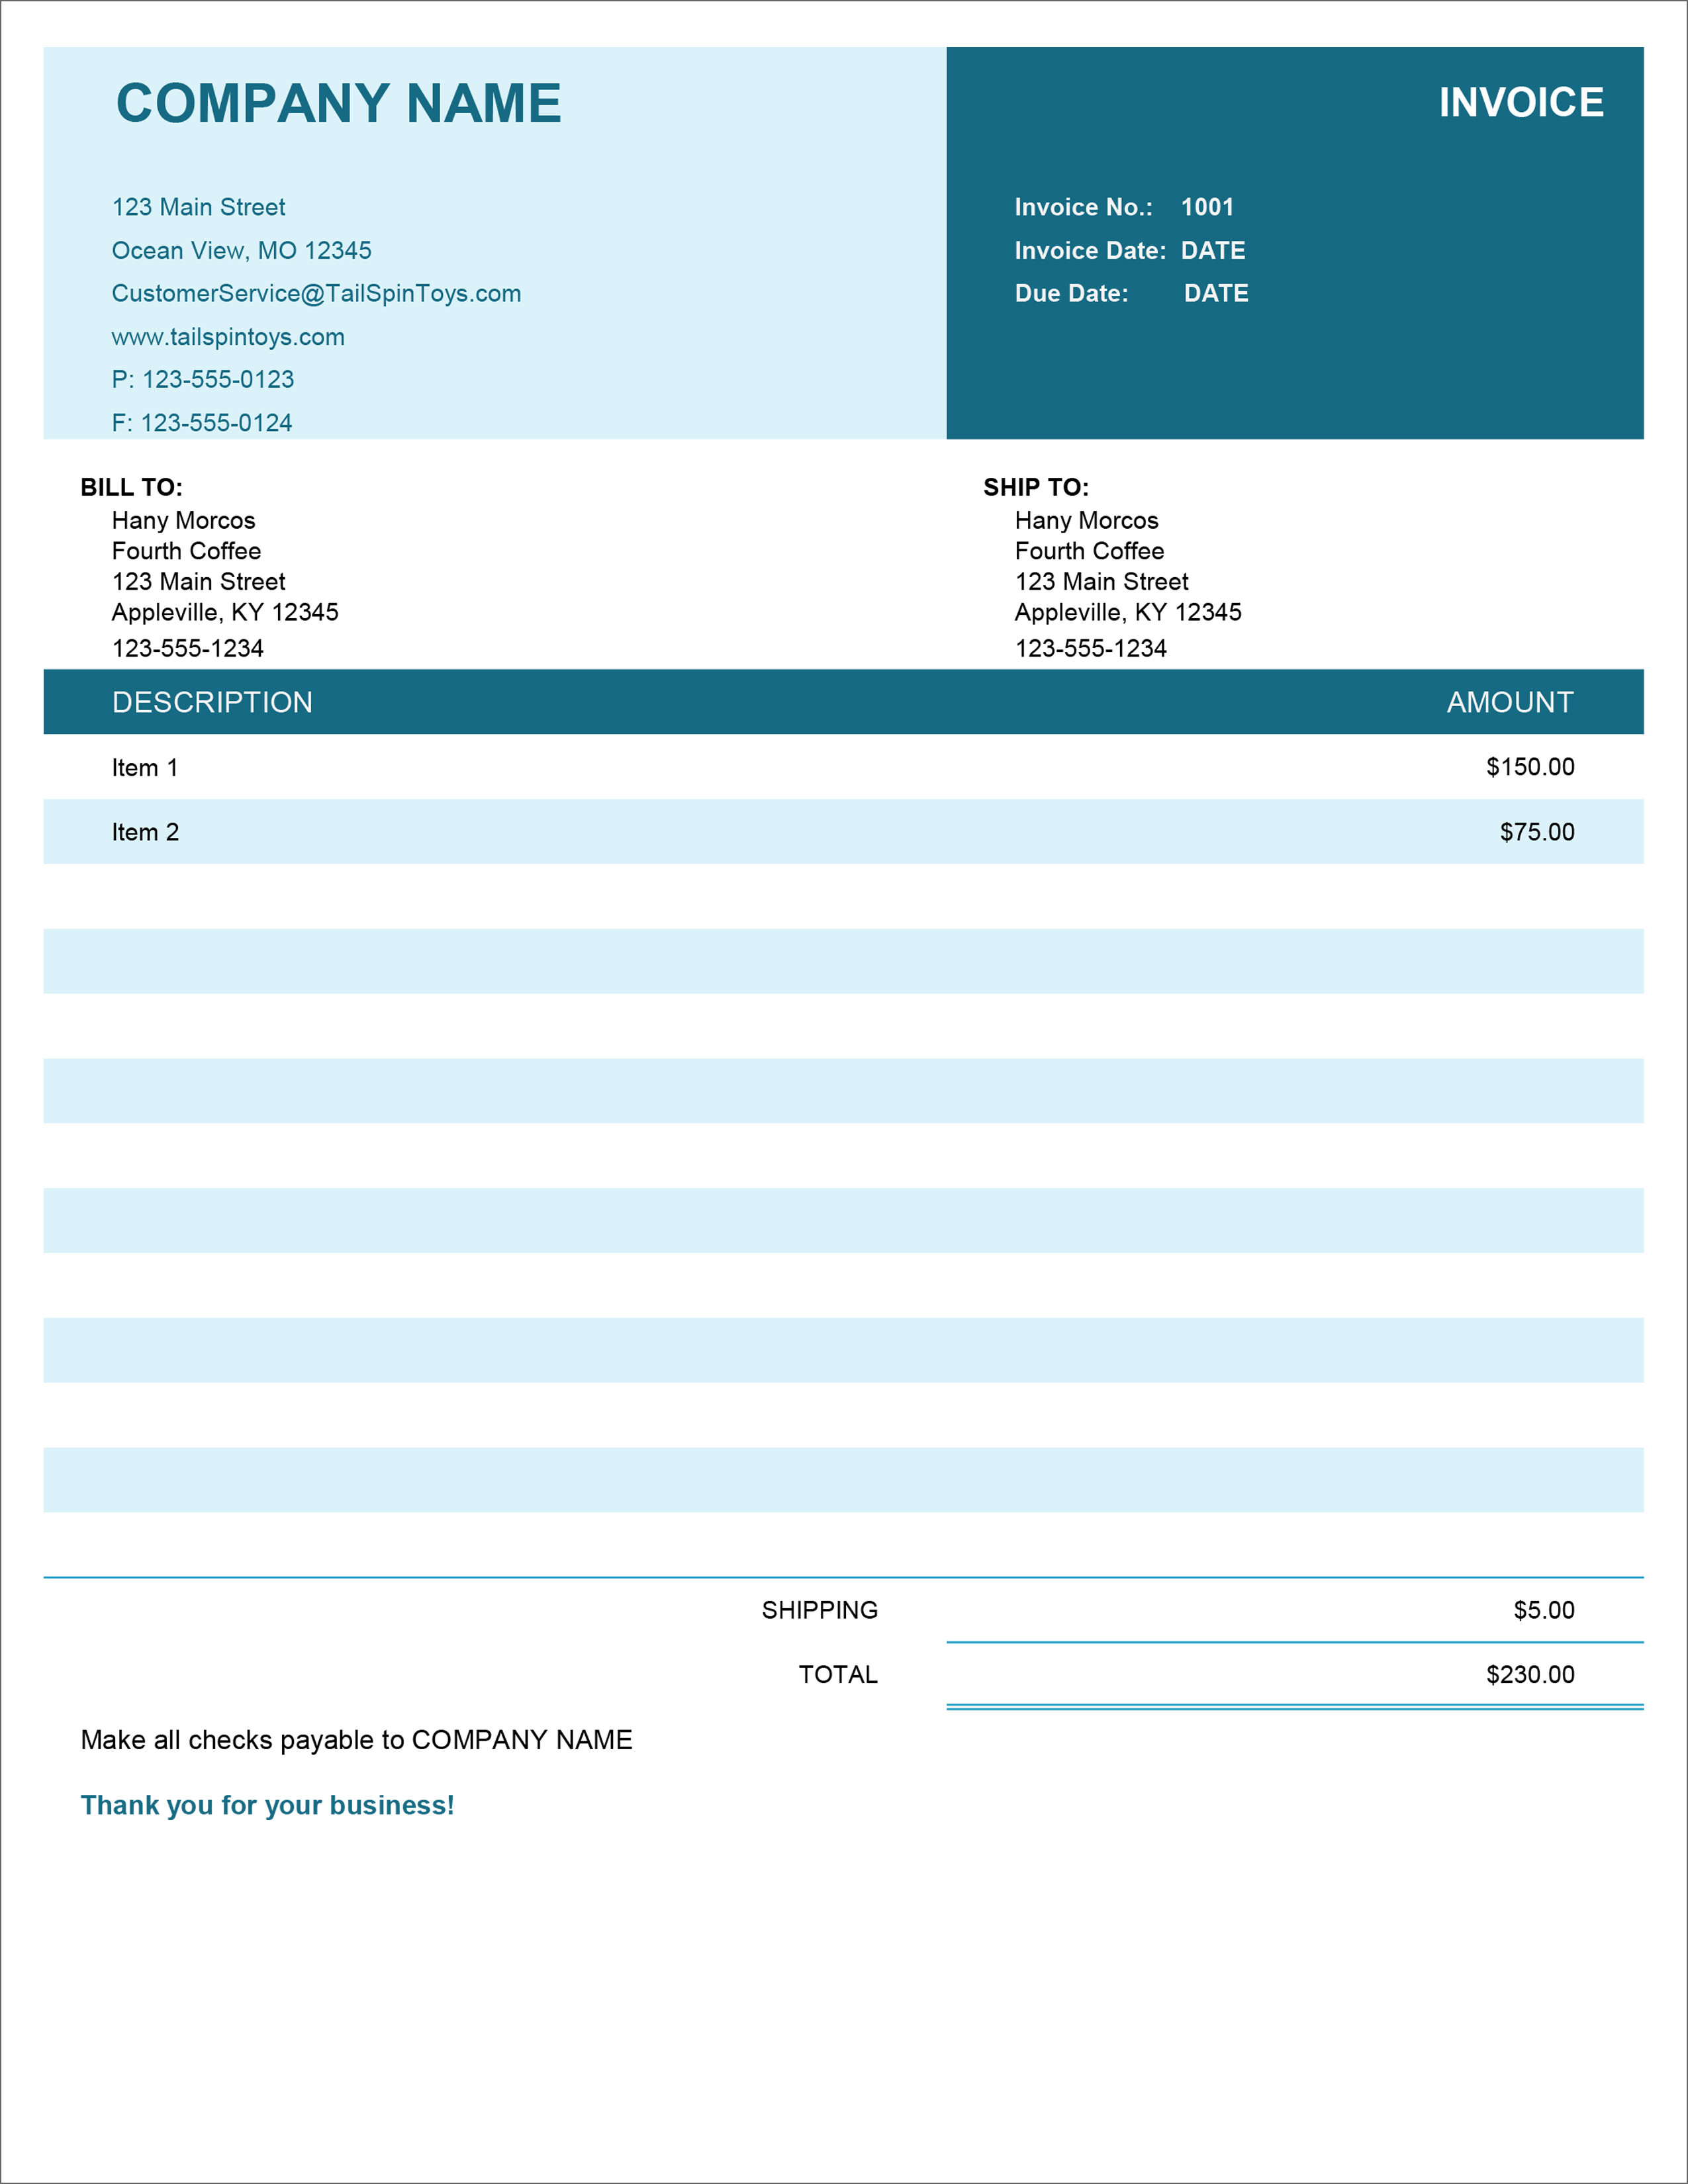 22 Free Invoice Templates In Microsoft Excel And DOCX Formats In Microsoft Office Word Invoice Template